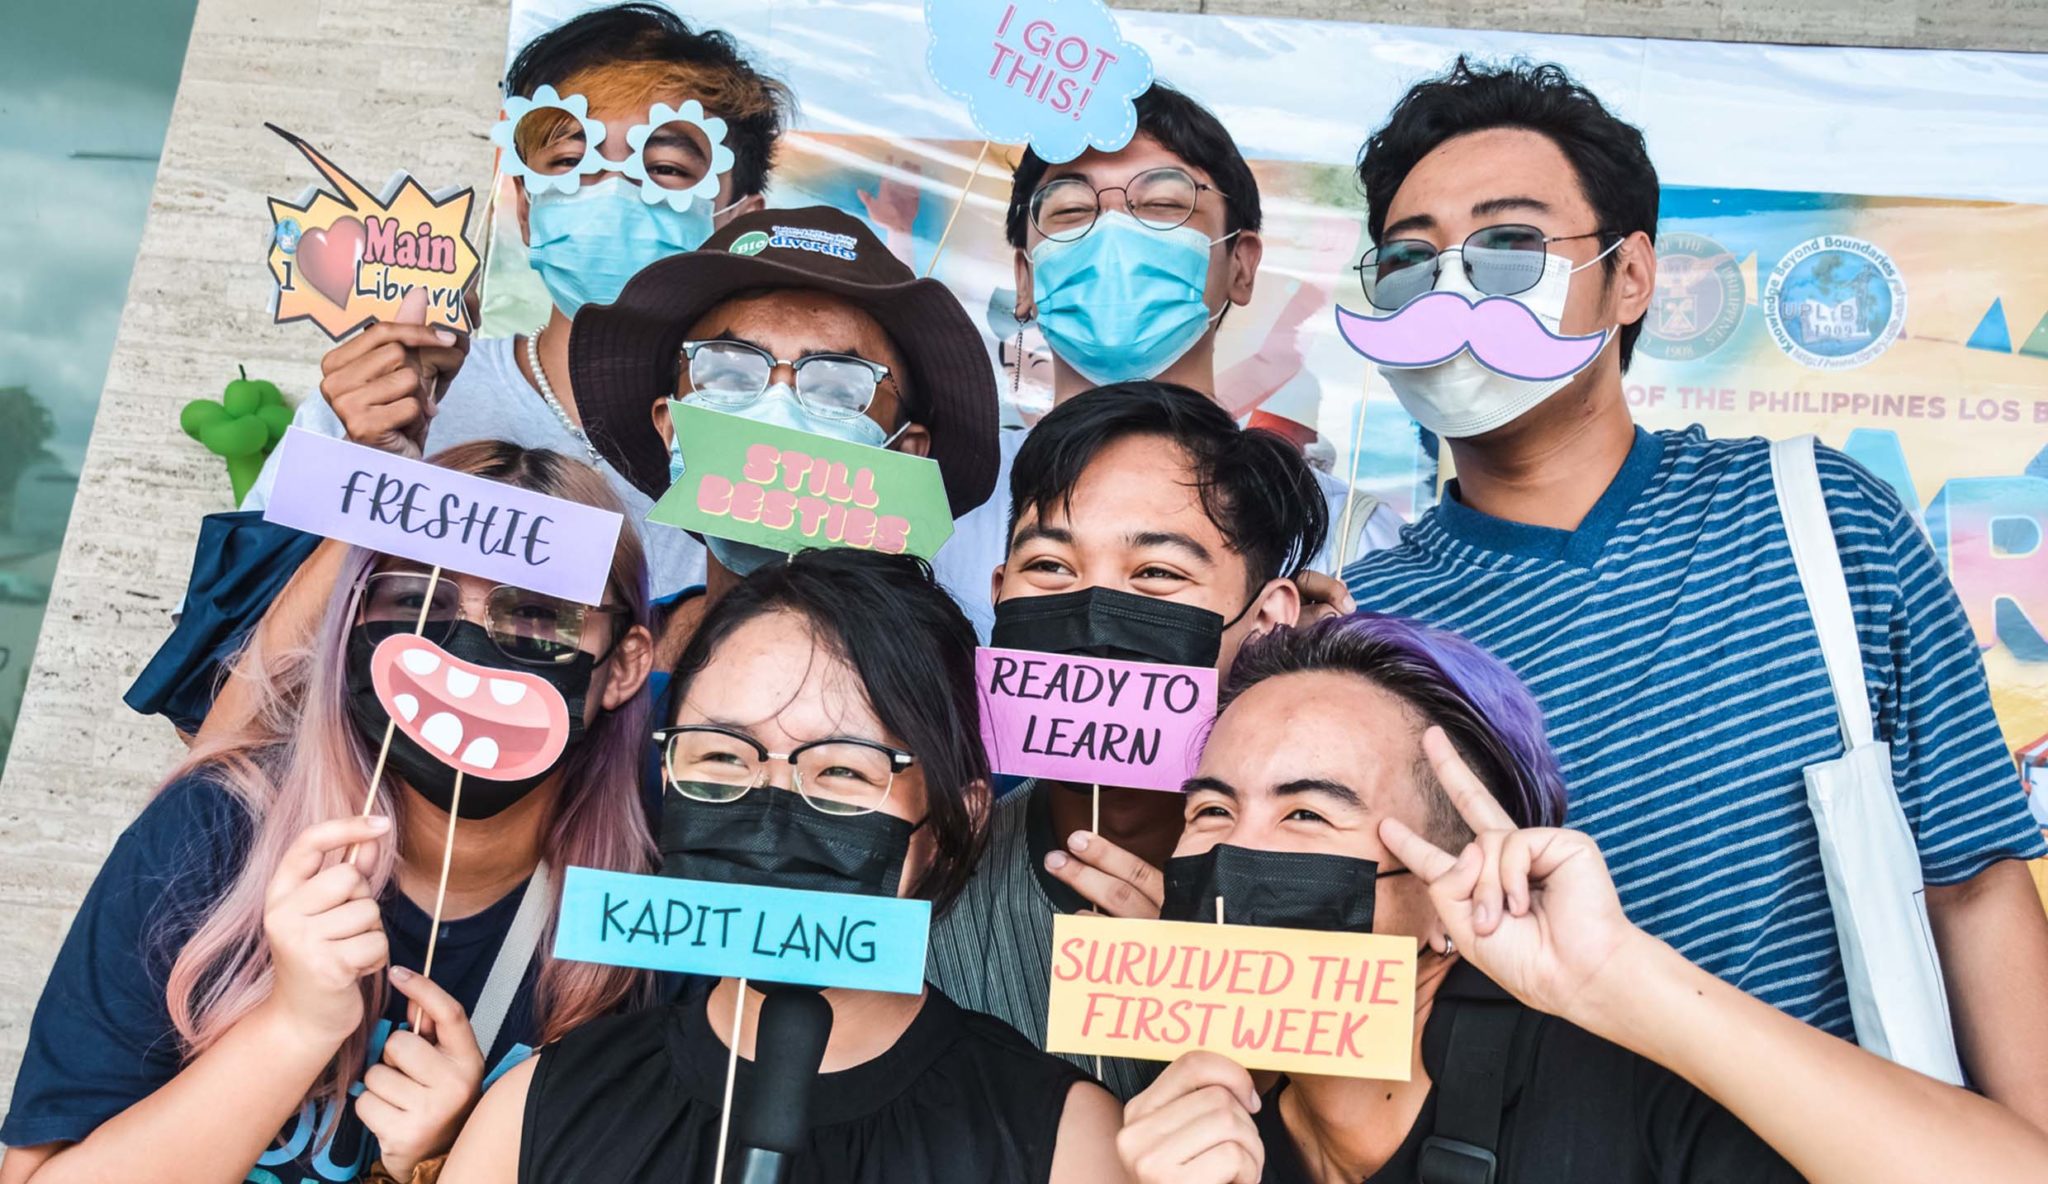 UL welcomes UPLB students to the campus at Lib Fiesta Fair